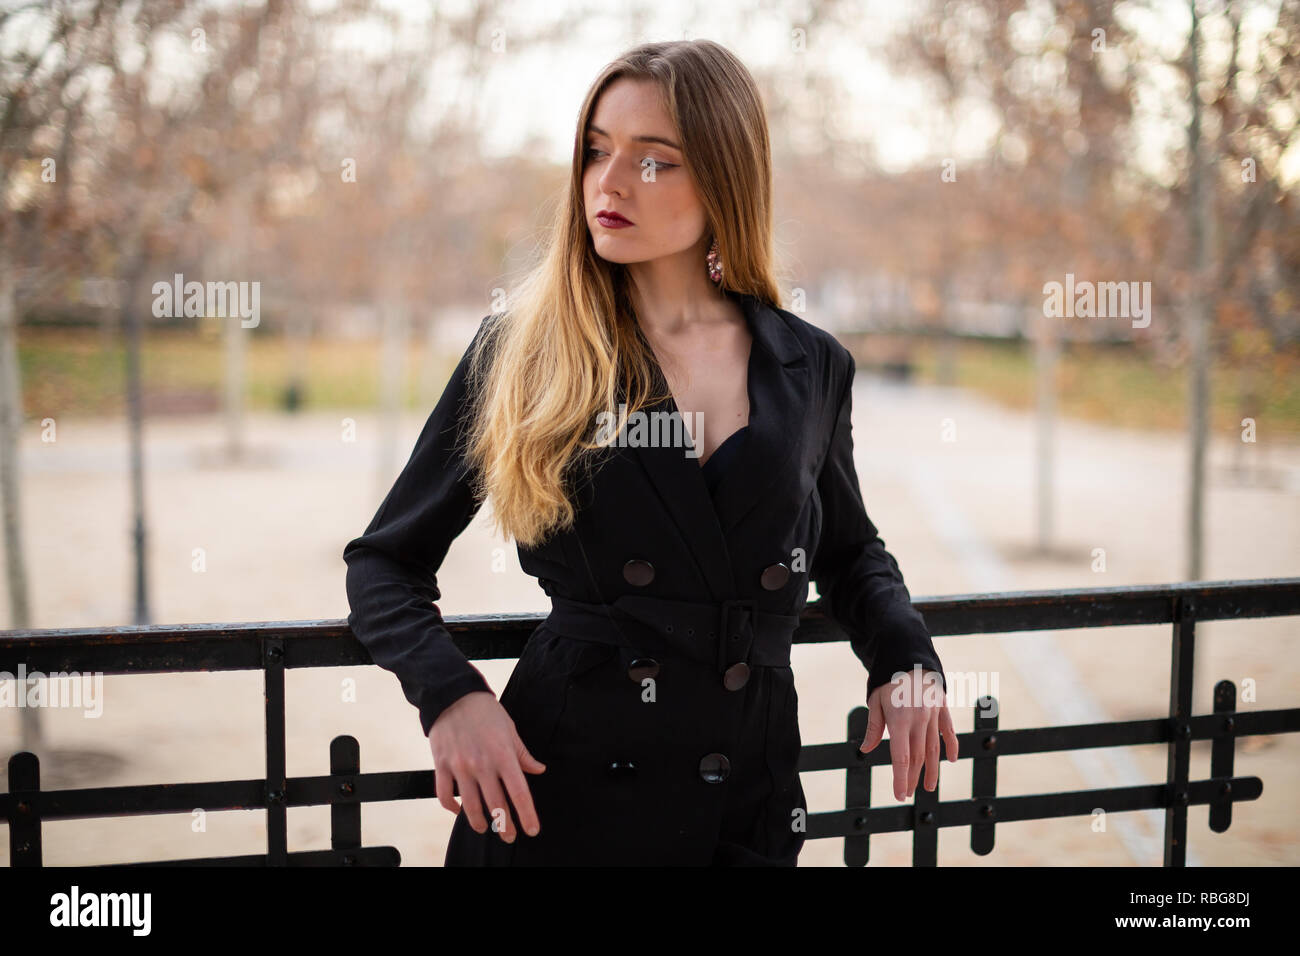 Pretty model woman posing in a park resting on a fence Stock Photo